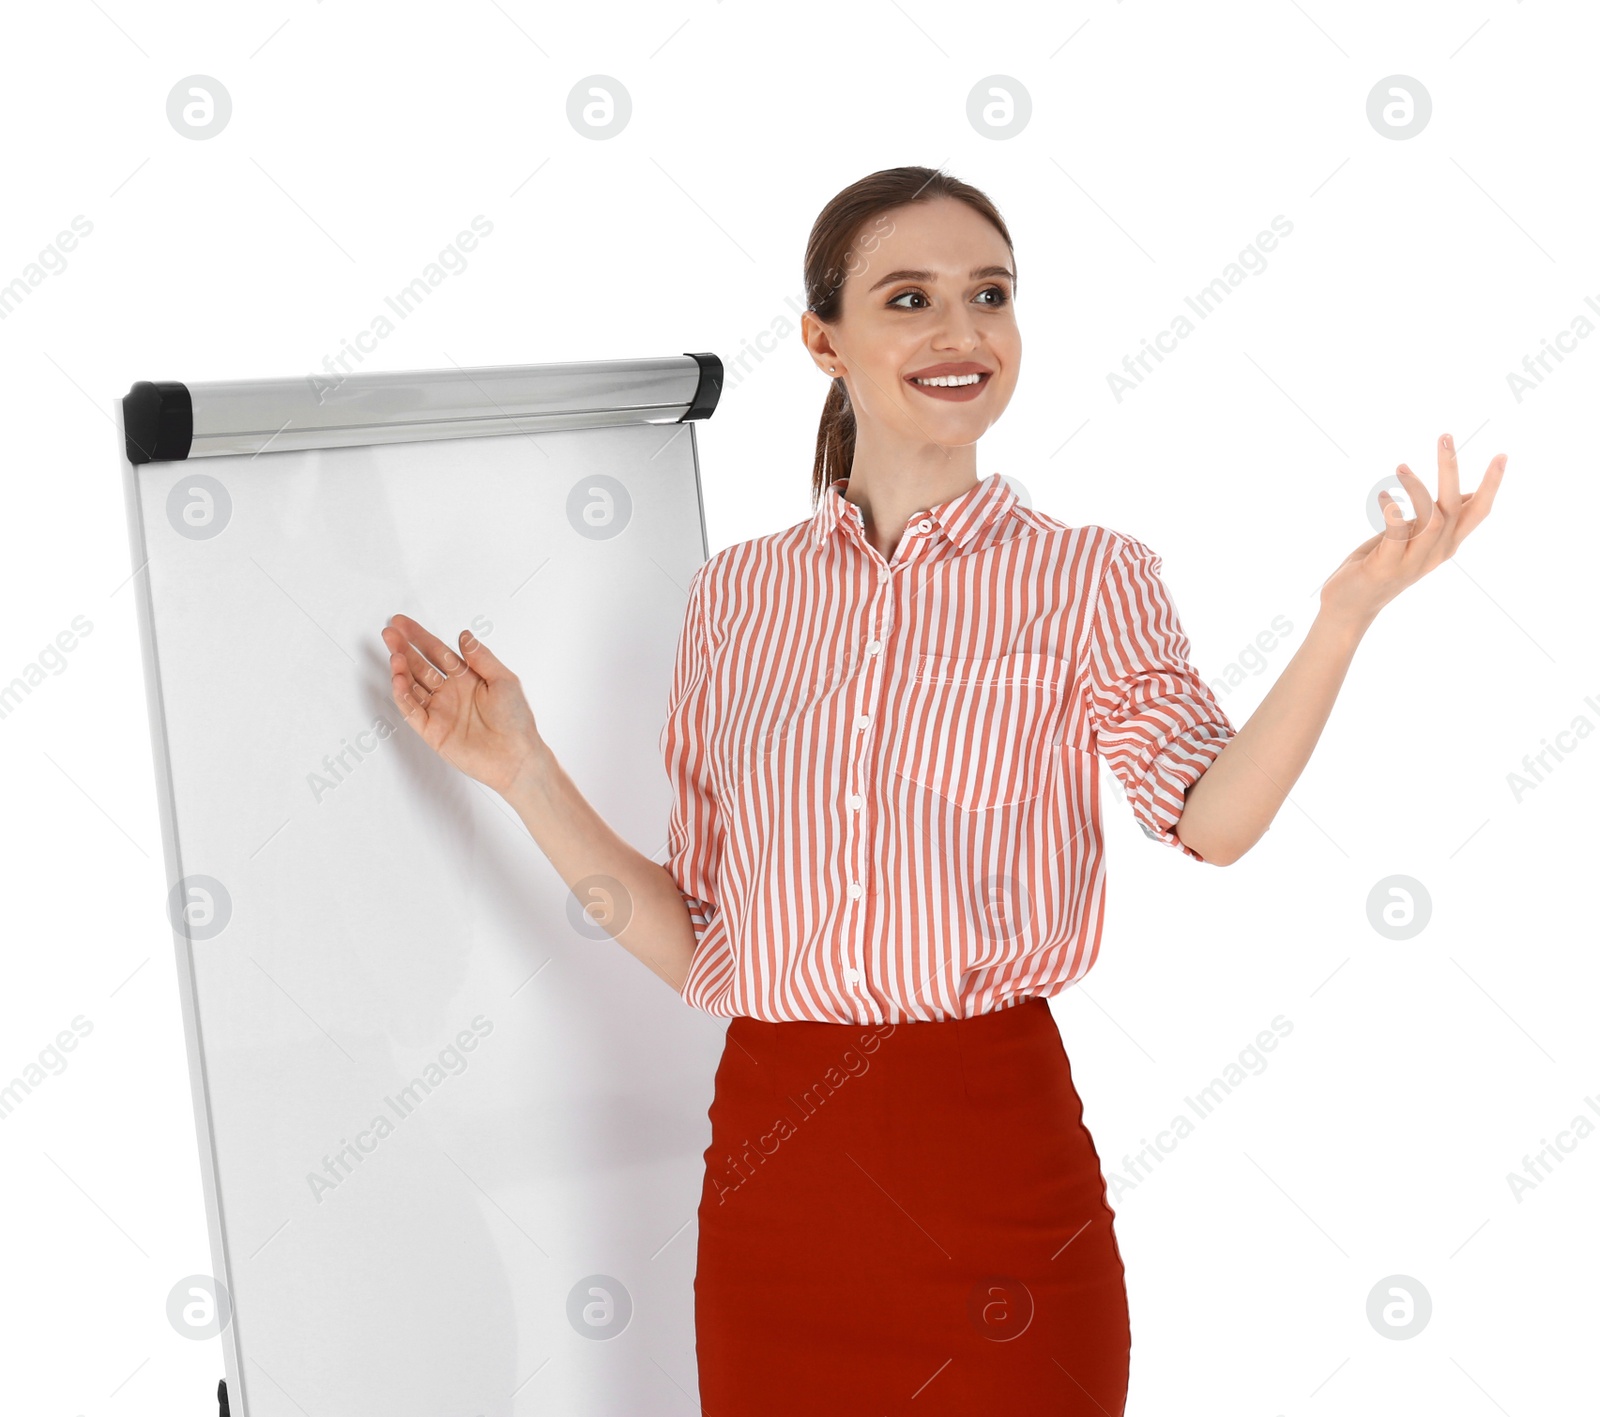 Photo of Professional business trainer near flip chart board on white background